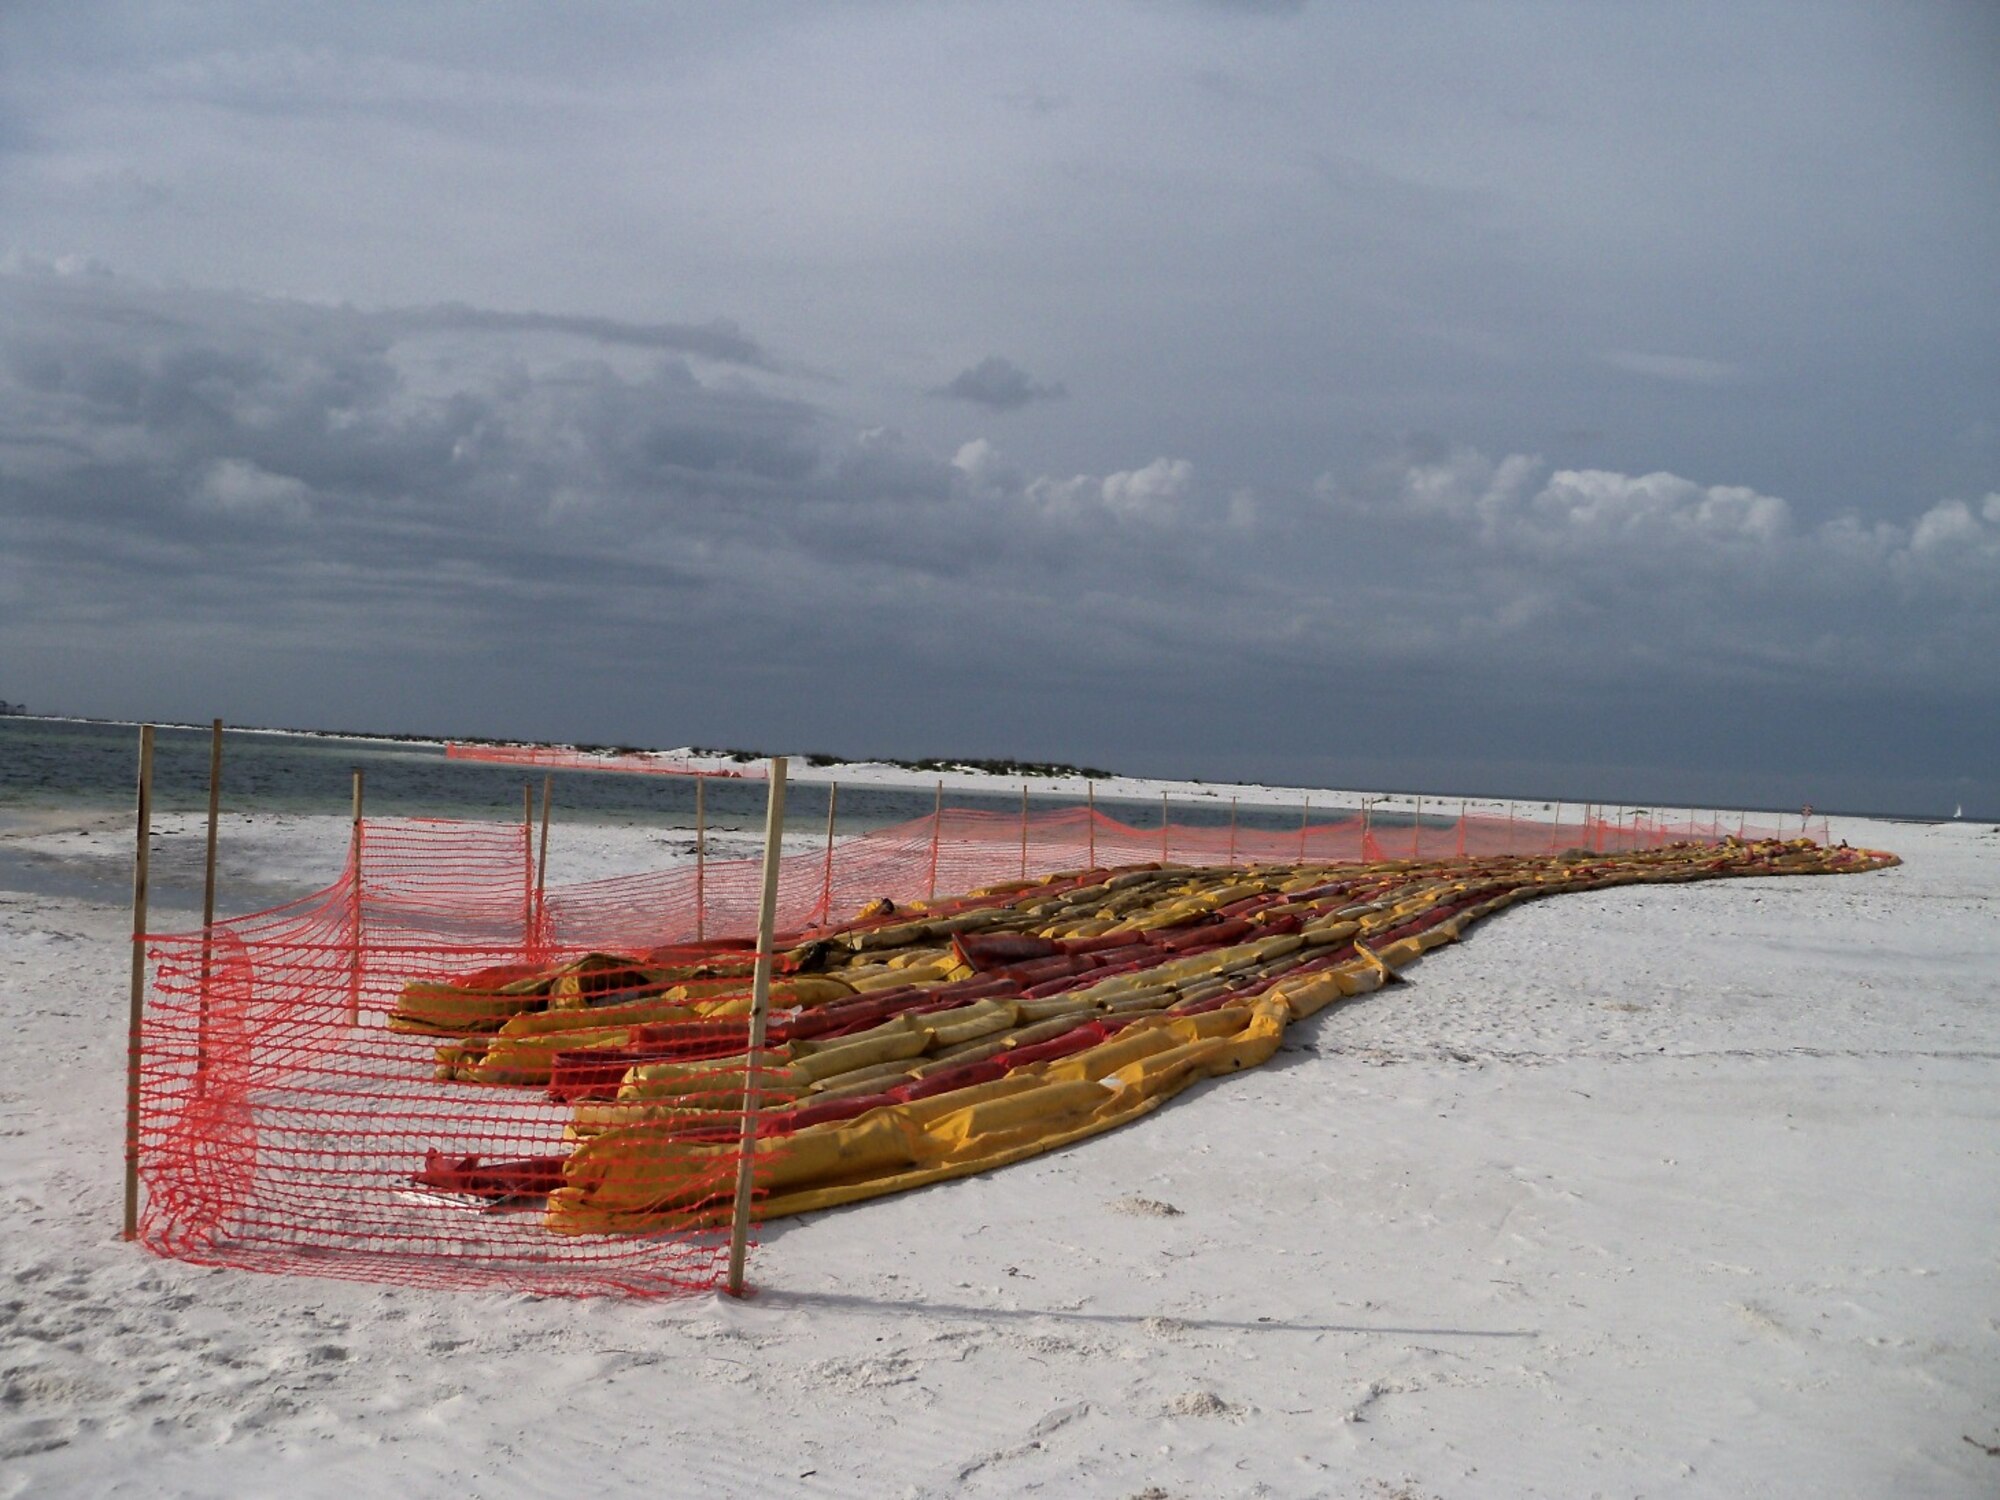 Oil containment booms lay along a beach on Tyndall July 1. The base has approximately 7,000 feet of boom, which form a barrier that skims oil and debris from the surface of the water.  The boom is foldable, lightweight and is made of a vinyl-coated polyester. Installed at Tyndall in early May, all boom placements are per the U.S. Coast Guard Sector Mobile Area Contingency Plan. (Courtesy photo)